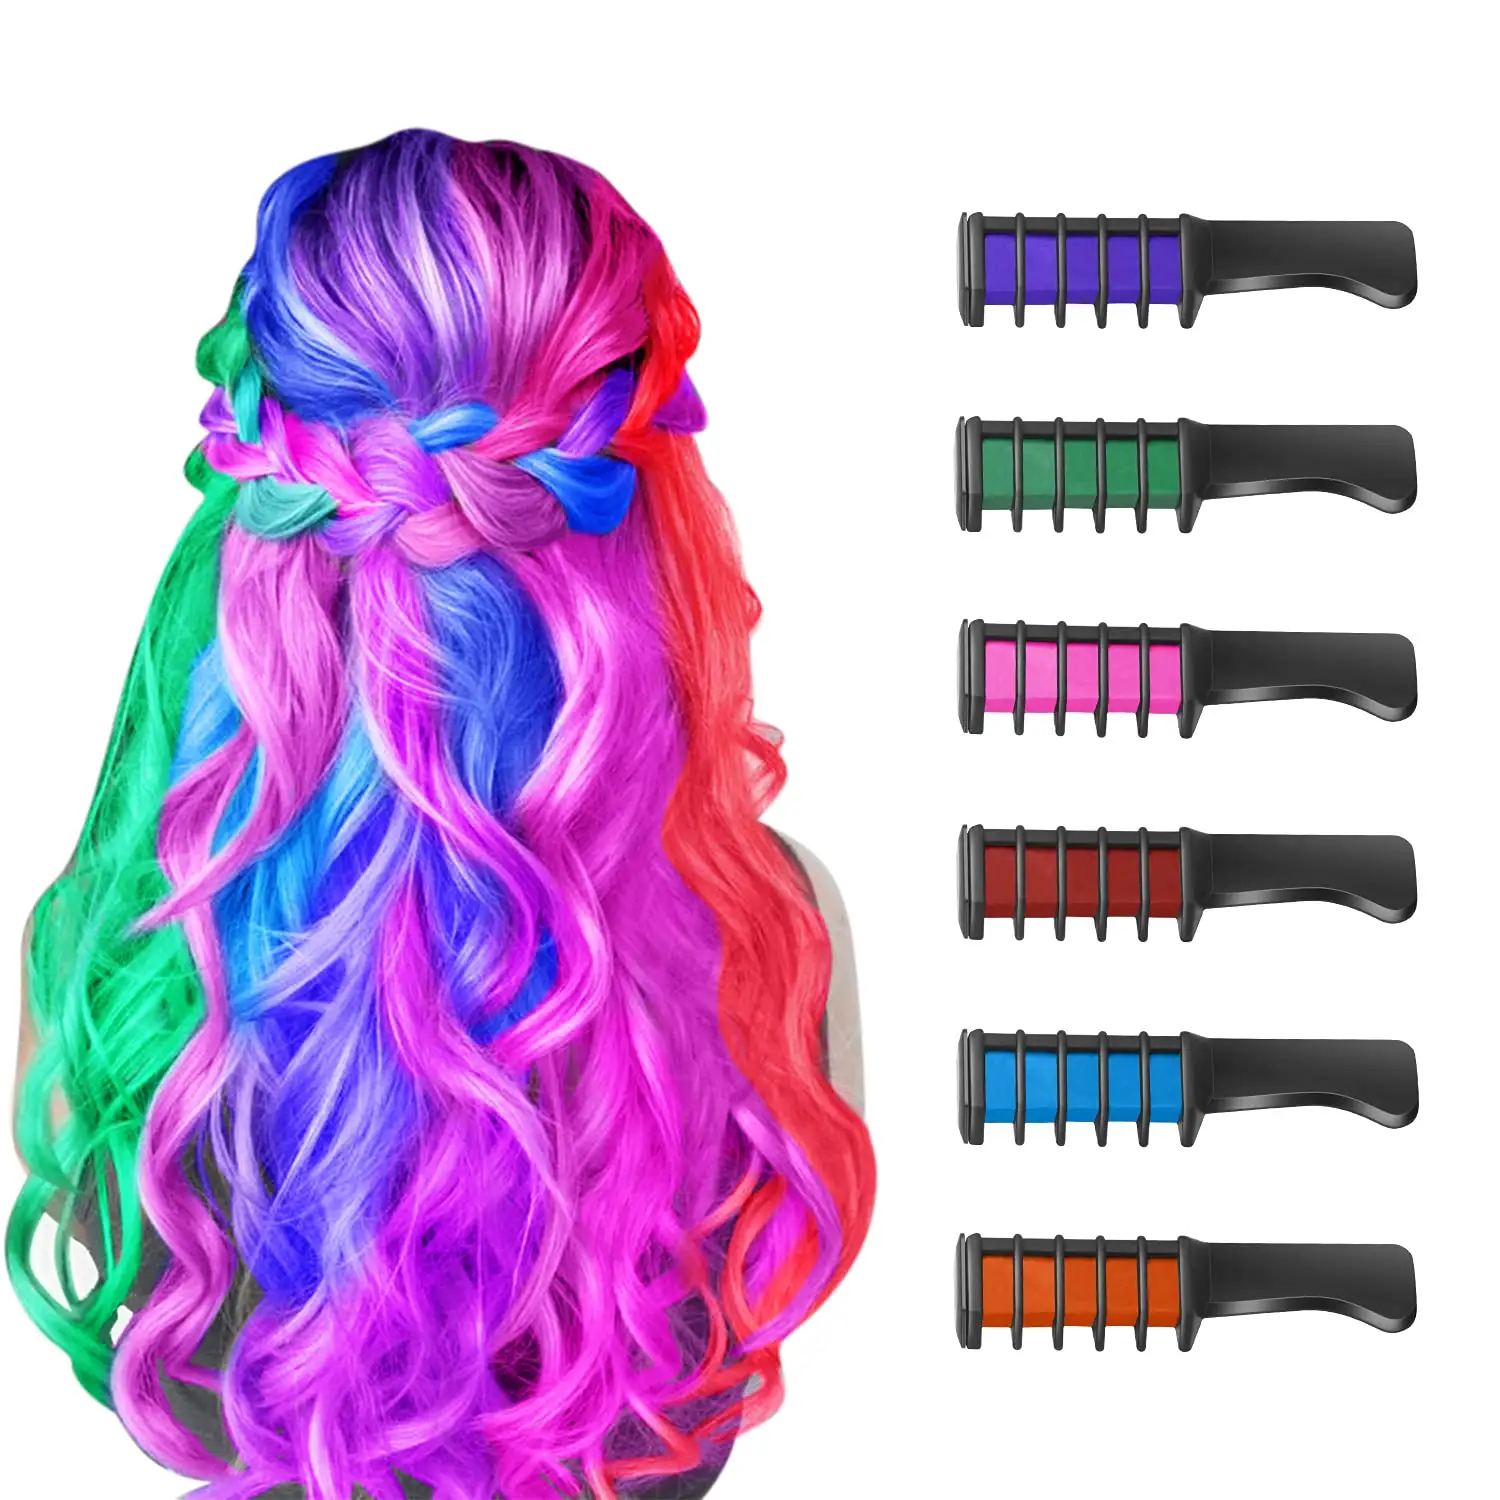 New Hair Chalk Comb Temporary DIY Hair Color for girls kids Washable Hair Chalk for Halloween Christmas New Year Birthday Party